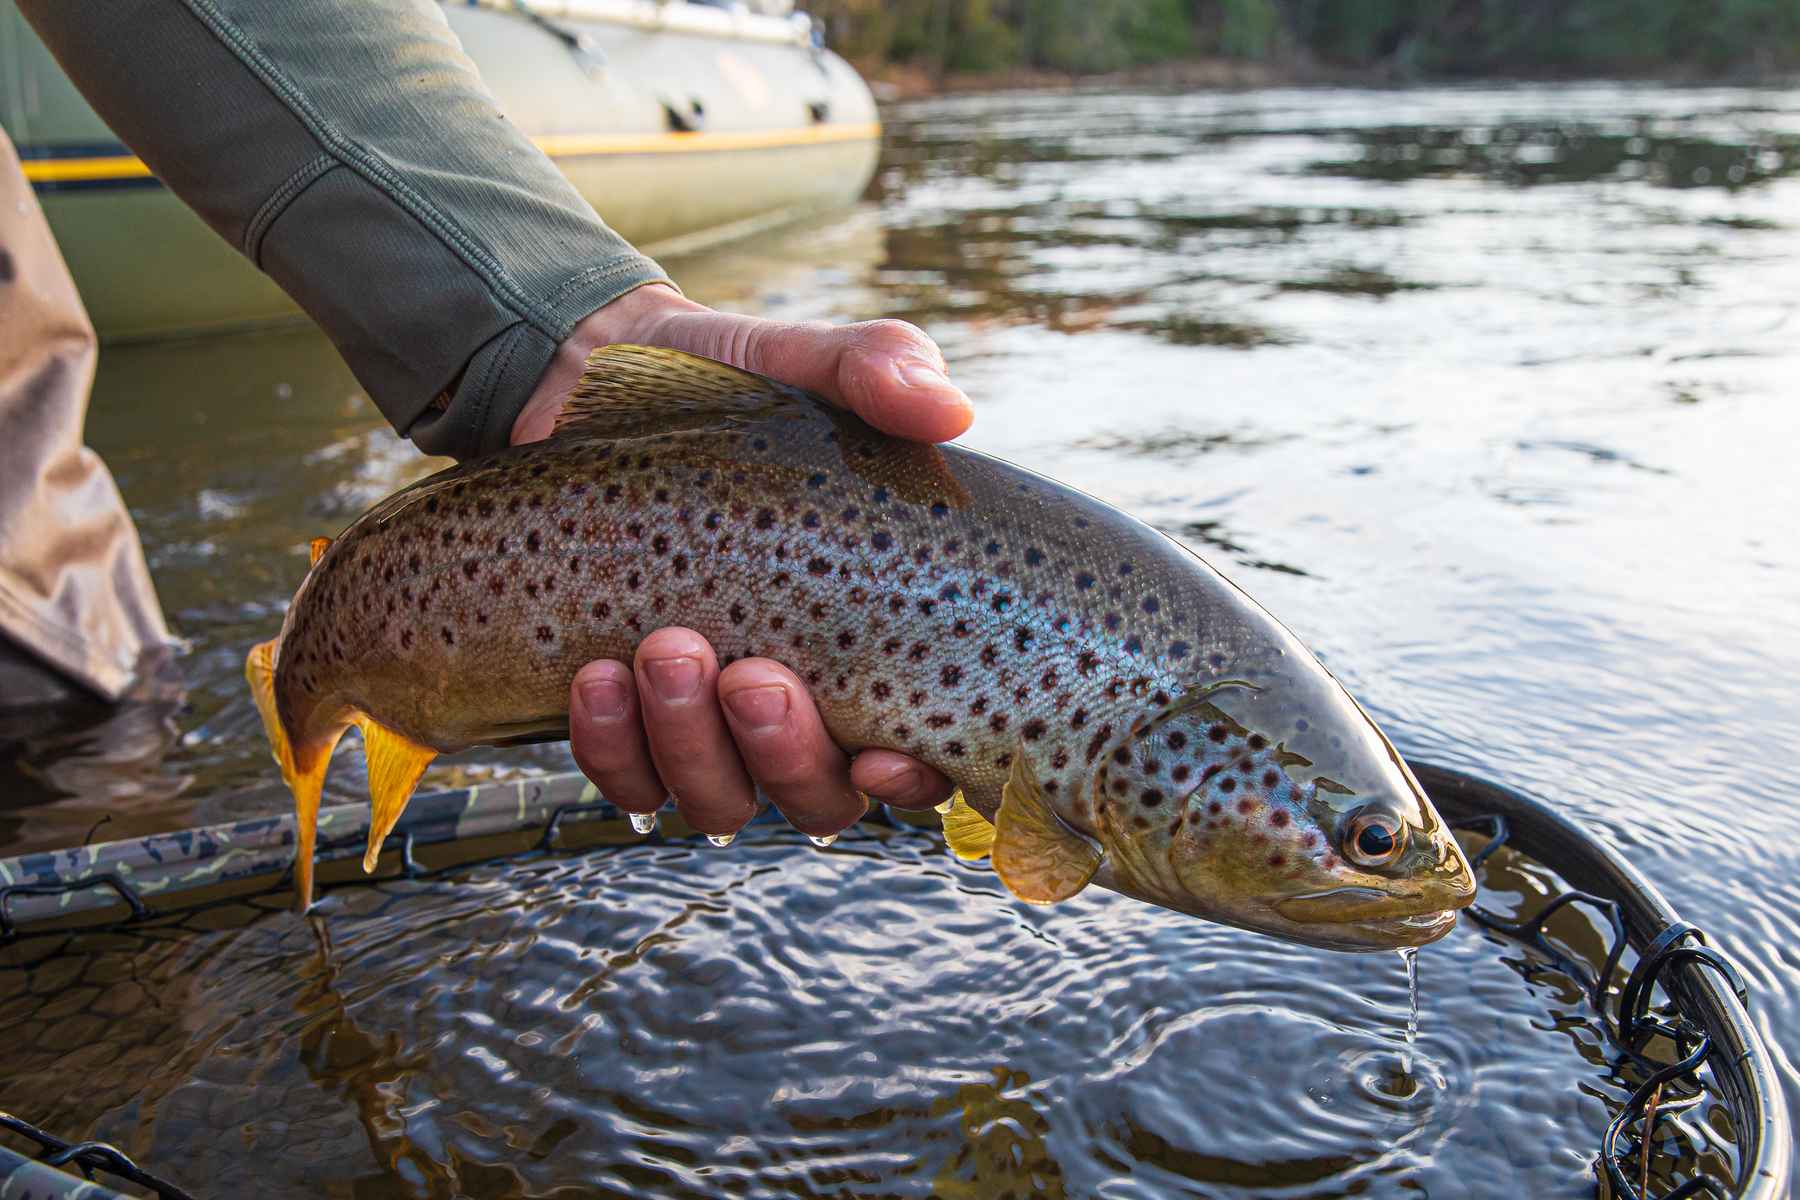 Trout are in hot water in 2021 | Hatch Magazine - Fly Fishing, etc.